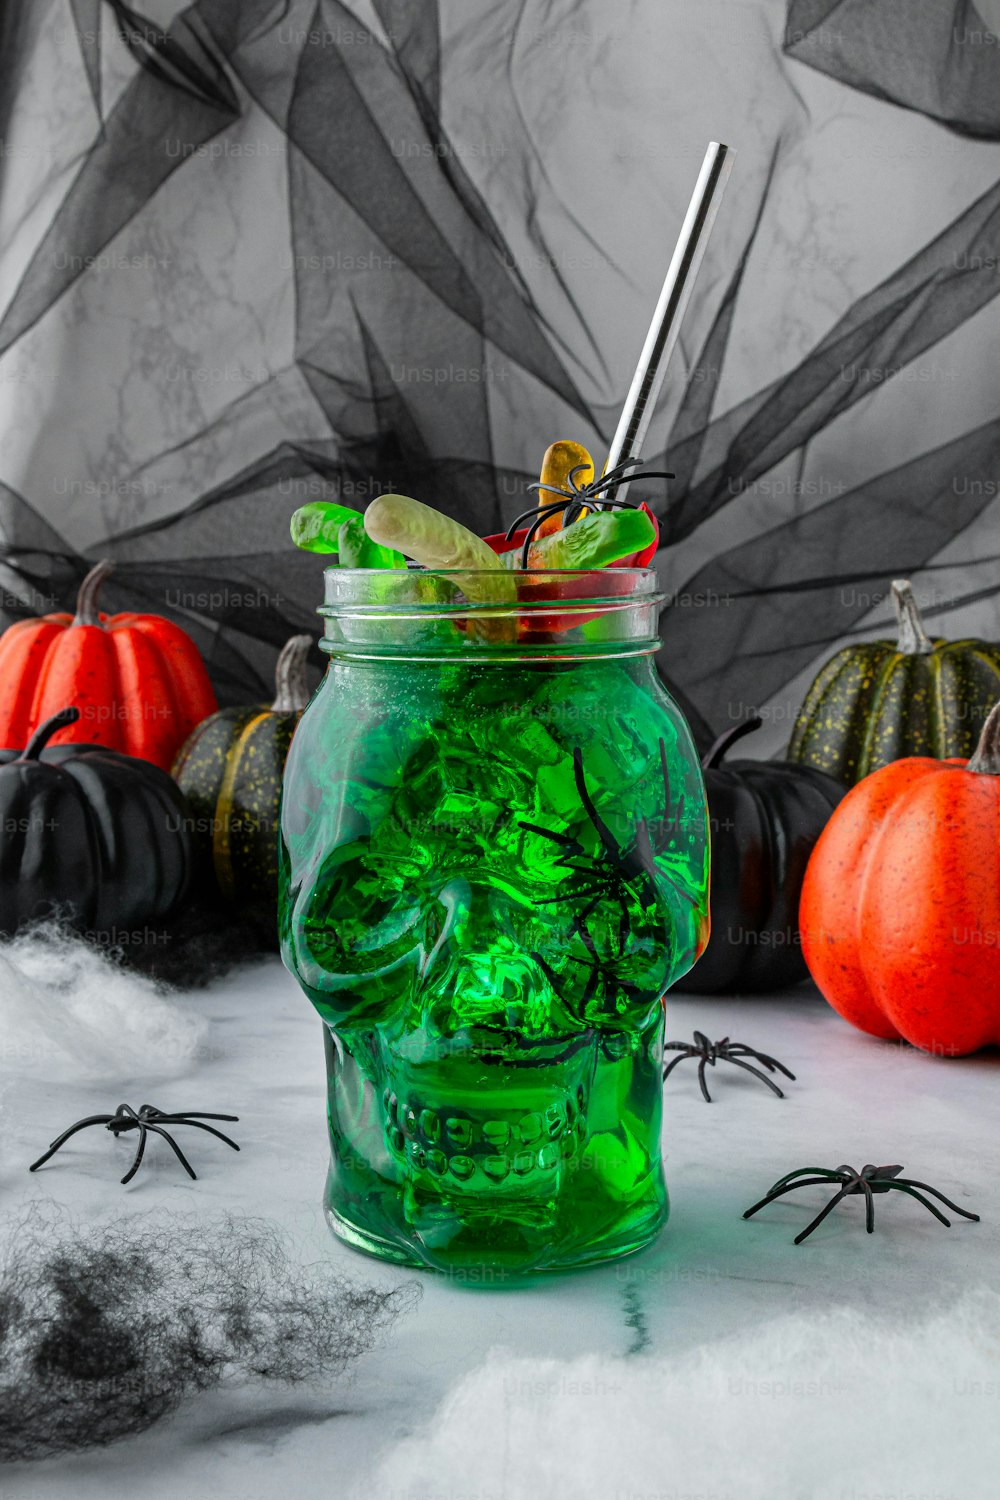 a jar filled with green liquid and halloween decorations